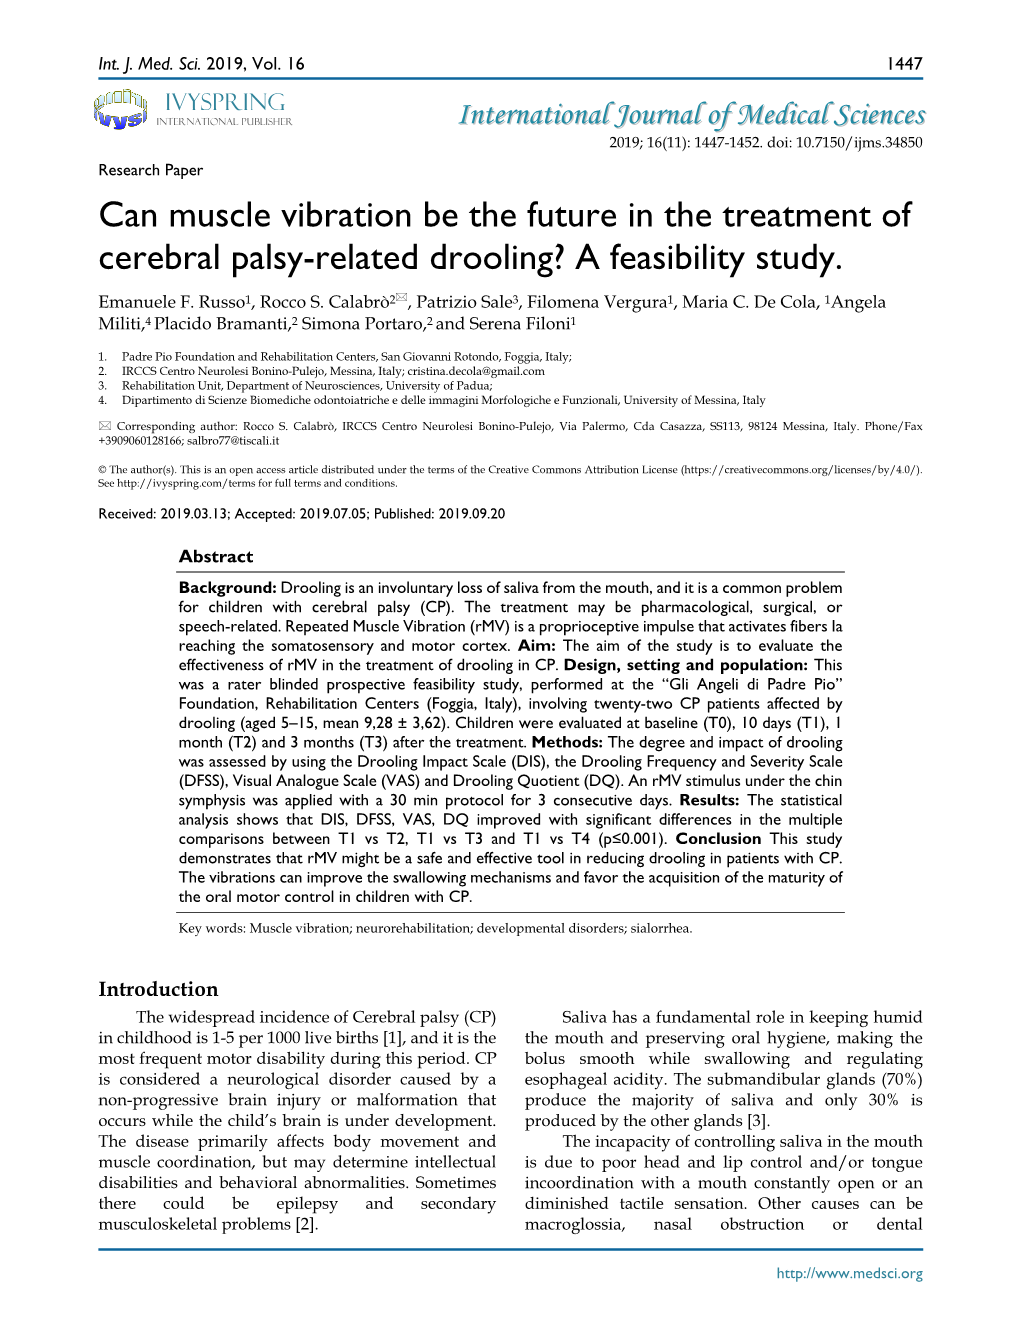 Can Muscle Vibration Be the Future in the Treatment of Cerebral Palsy-Related Drooling? a Feasibility Study